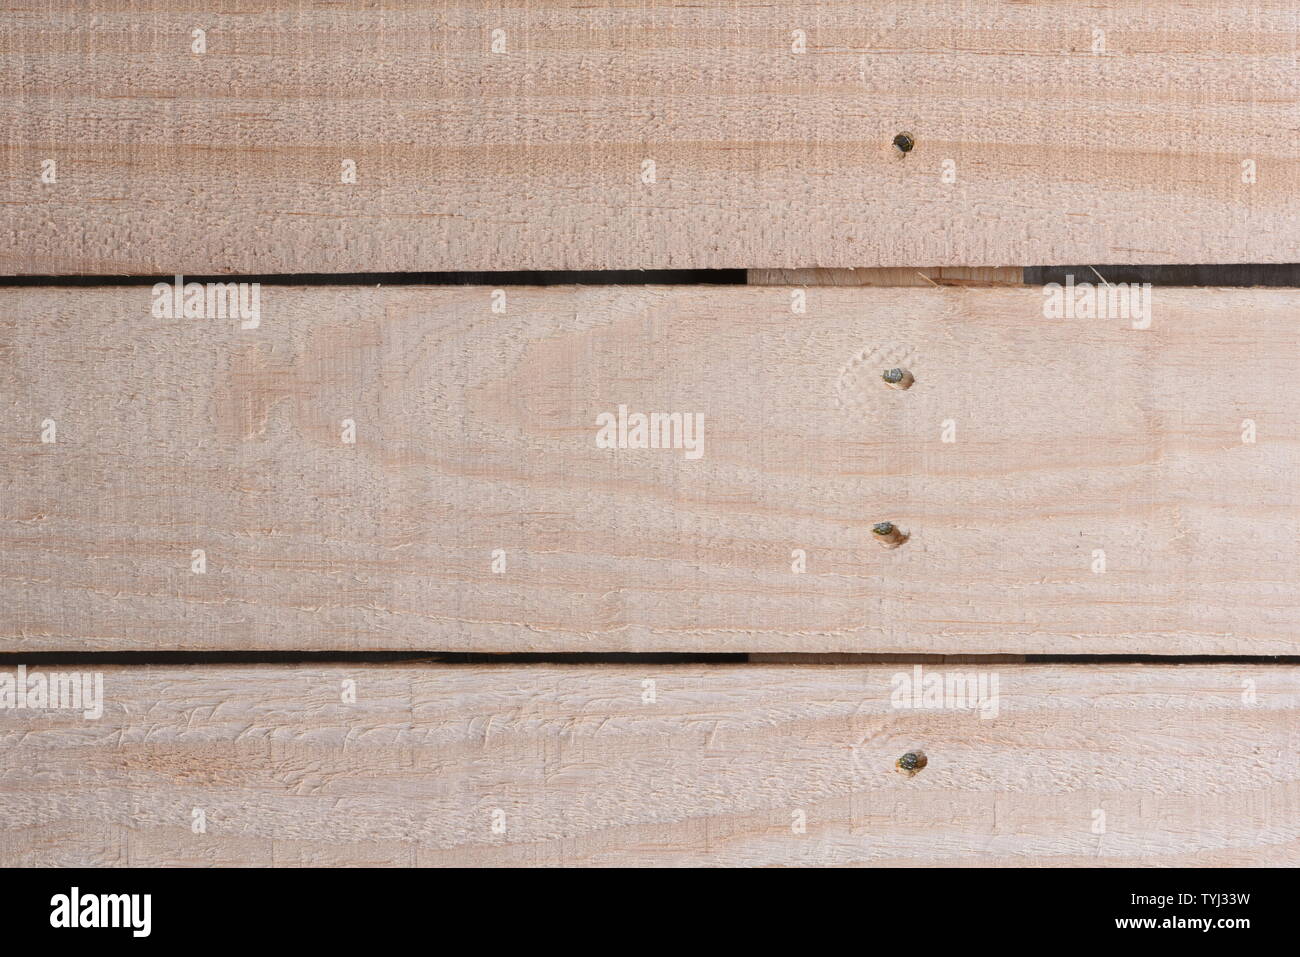 Natural wood planks as background Stock Photo